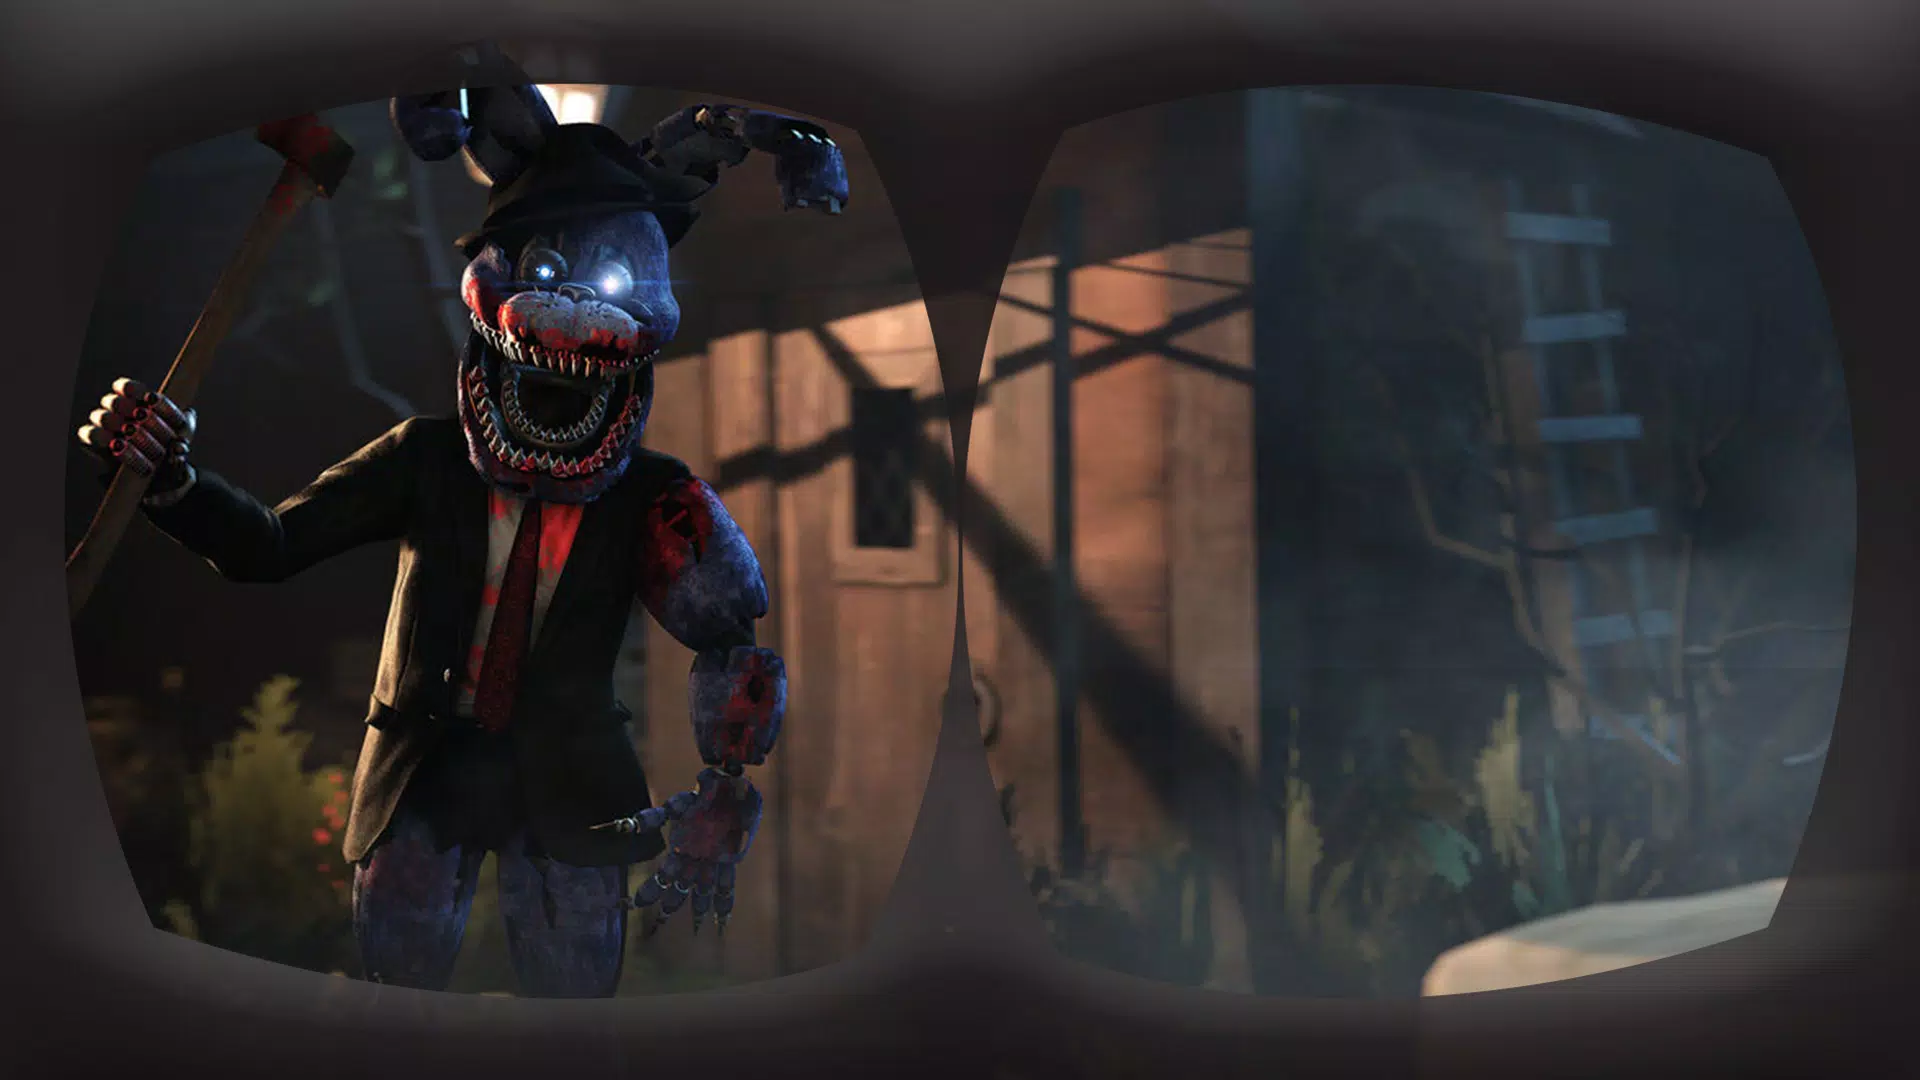 360 video] Horror Five Nights at Freddy's VR Help Wanted 360